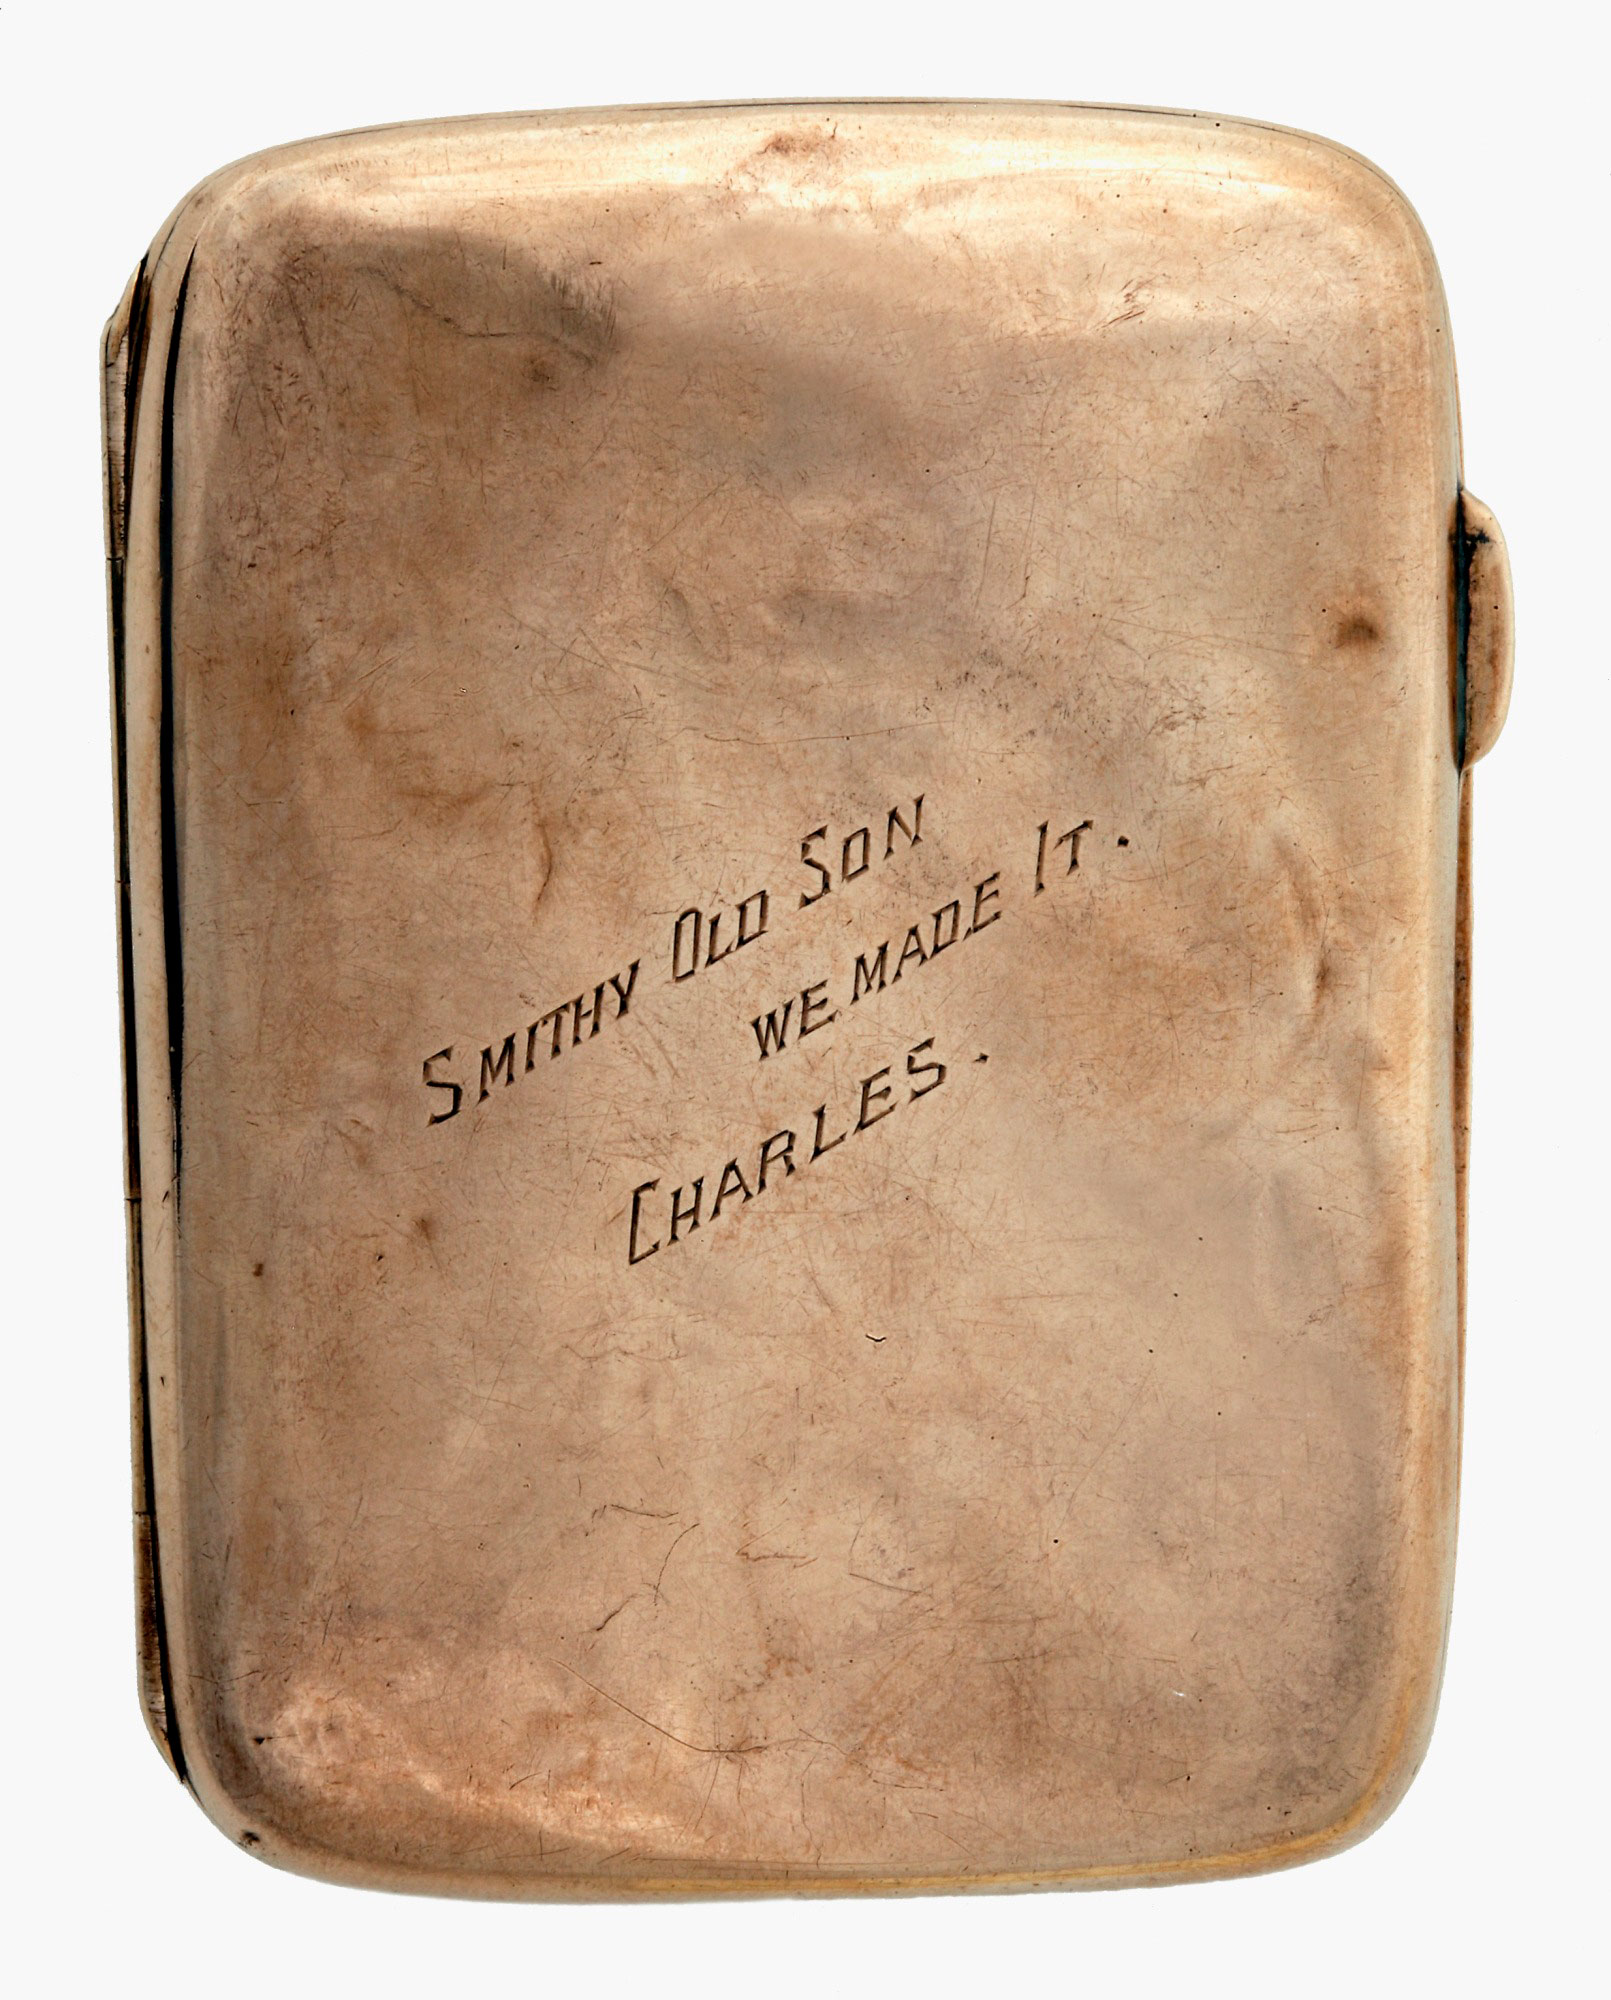 Gold cigarette case gifted to Charles Kingsford Smith by Charles Ulm.